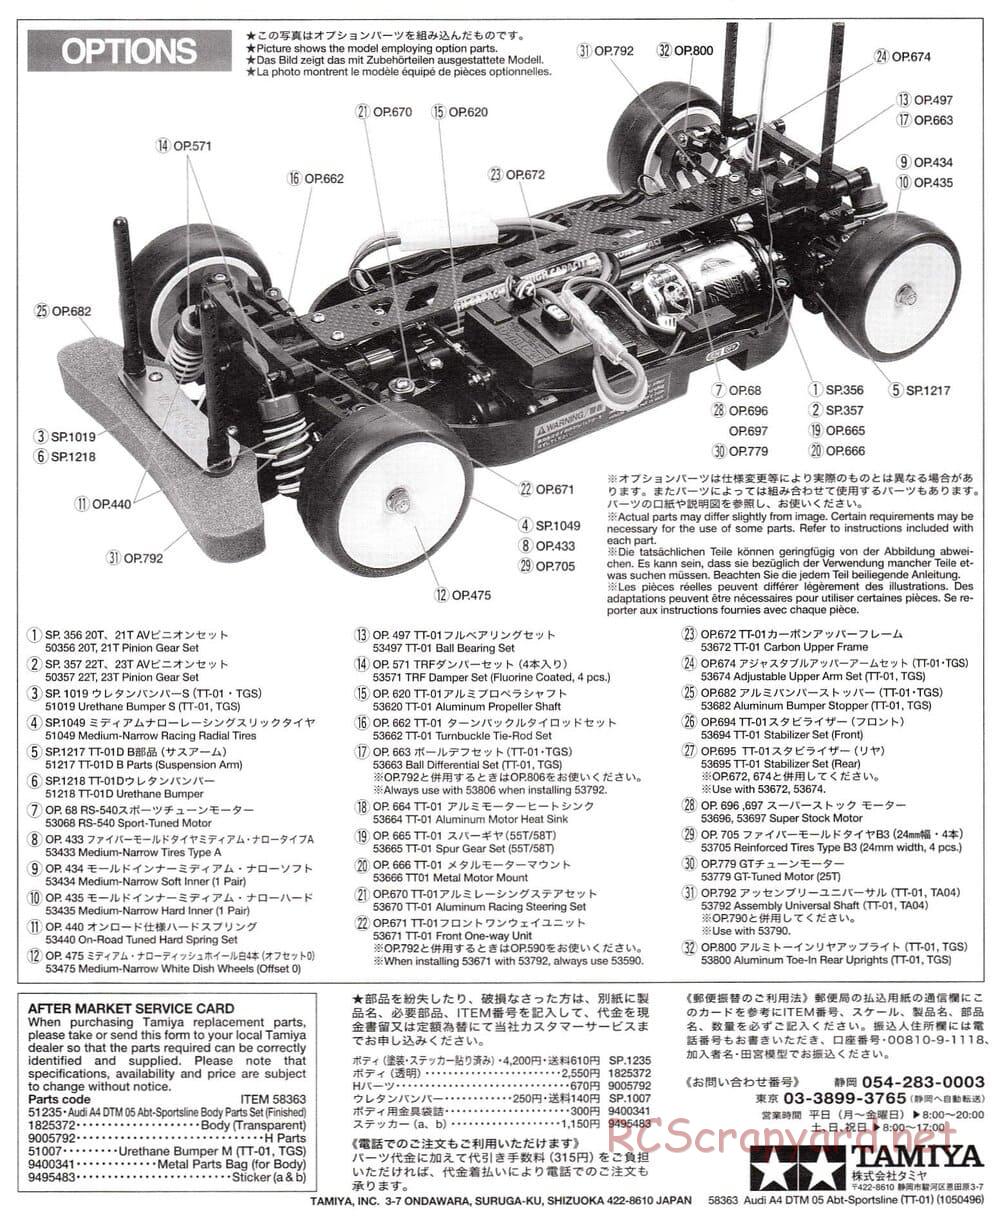 Tamiya - Audi A4 DTM 2005 Team Abt-Sportsline - TT-01 Chassis - Body Manual - Page 2